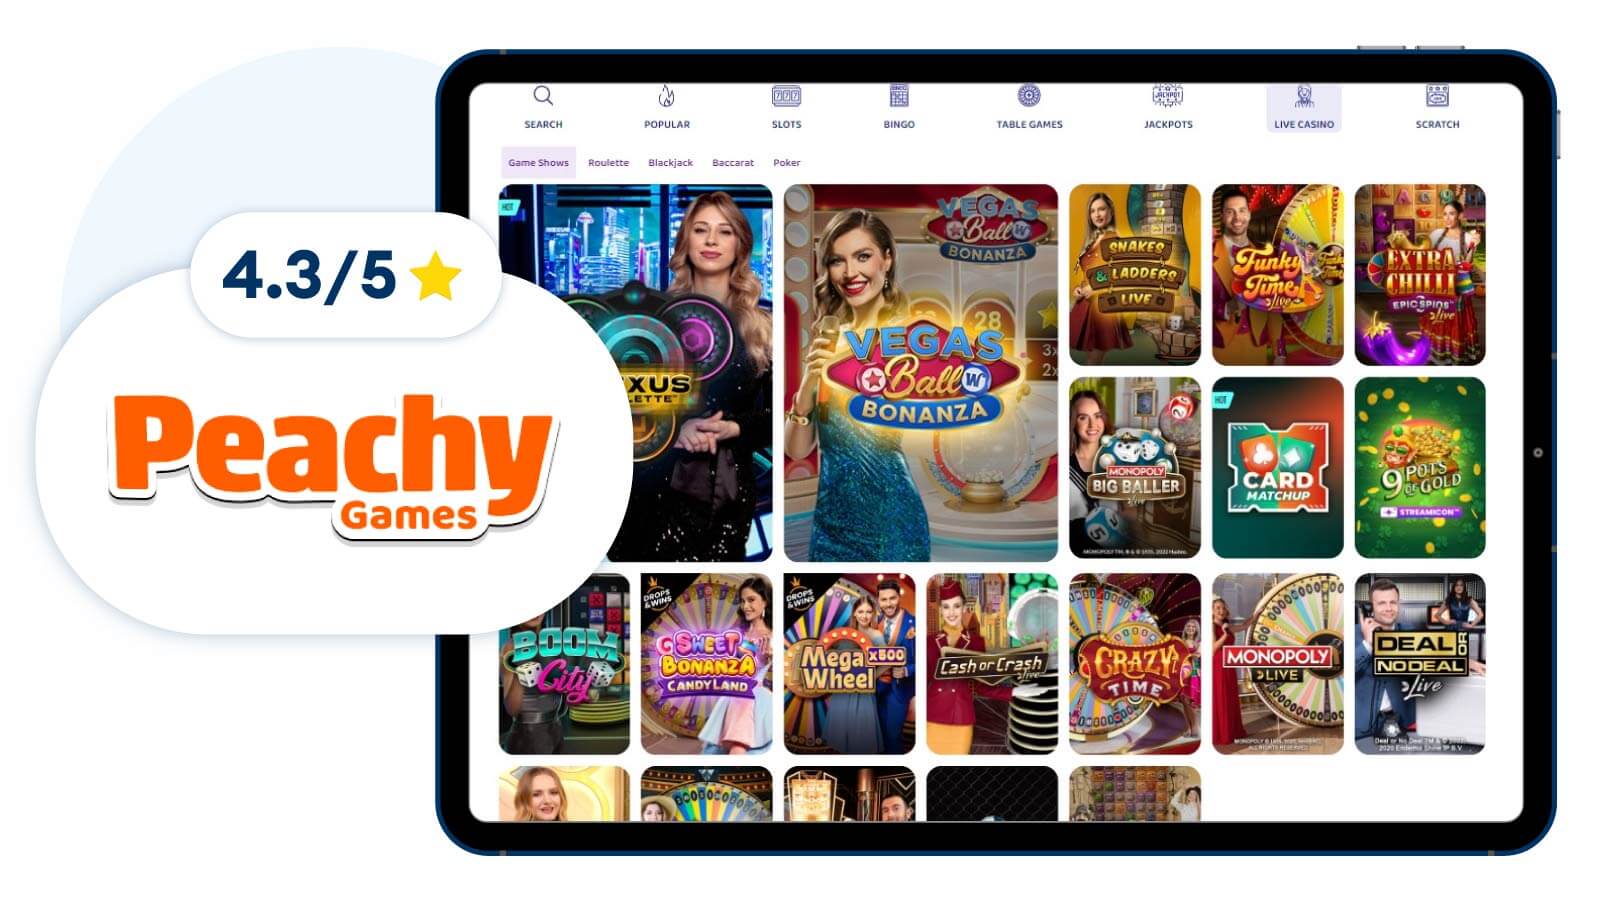 Peachy-Games-Top-Rated-New-Live-Casino-Online